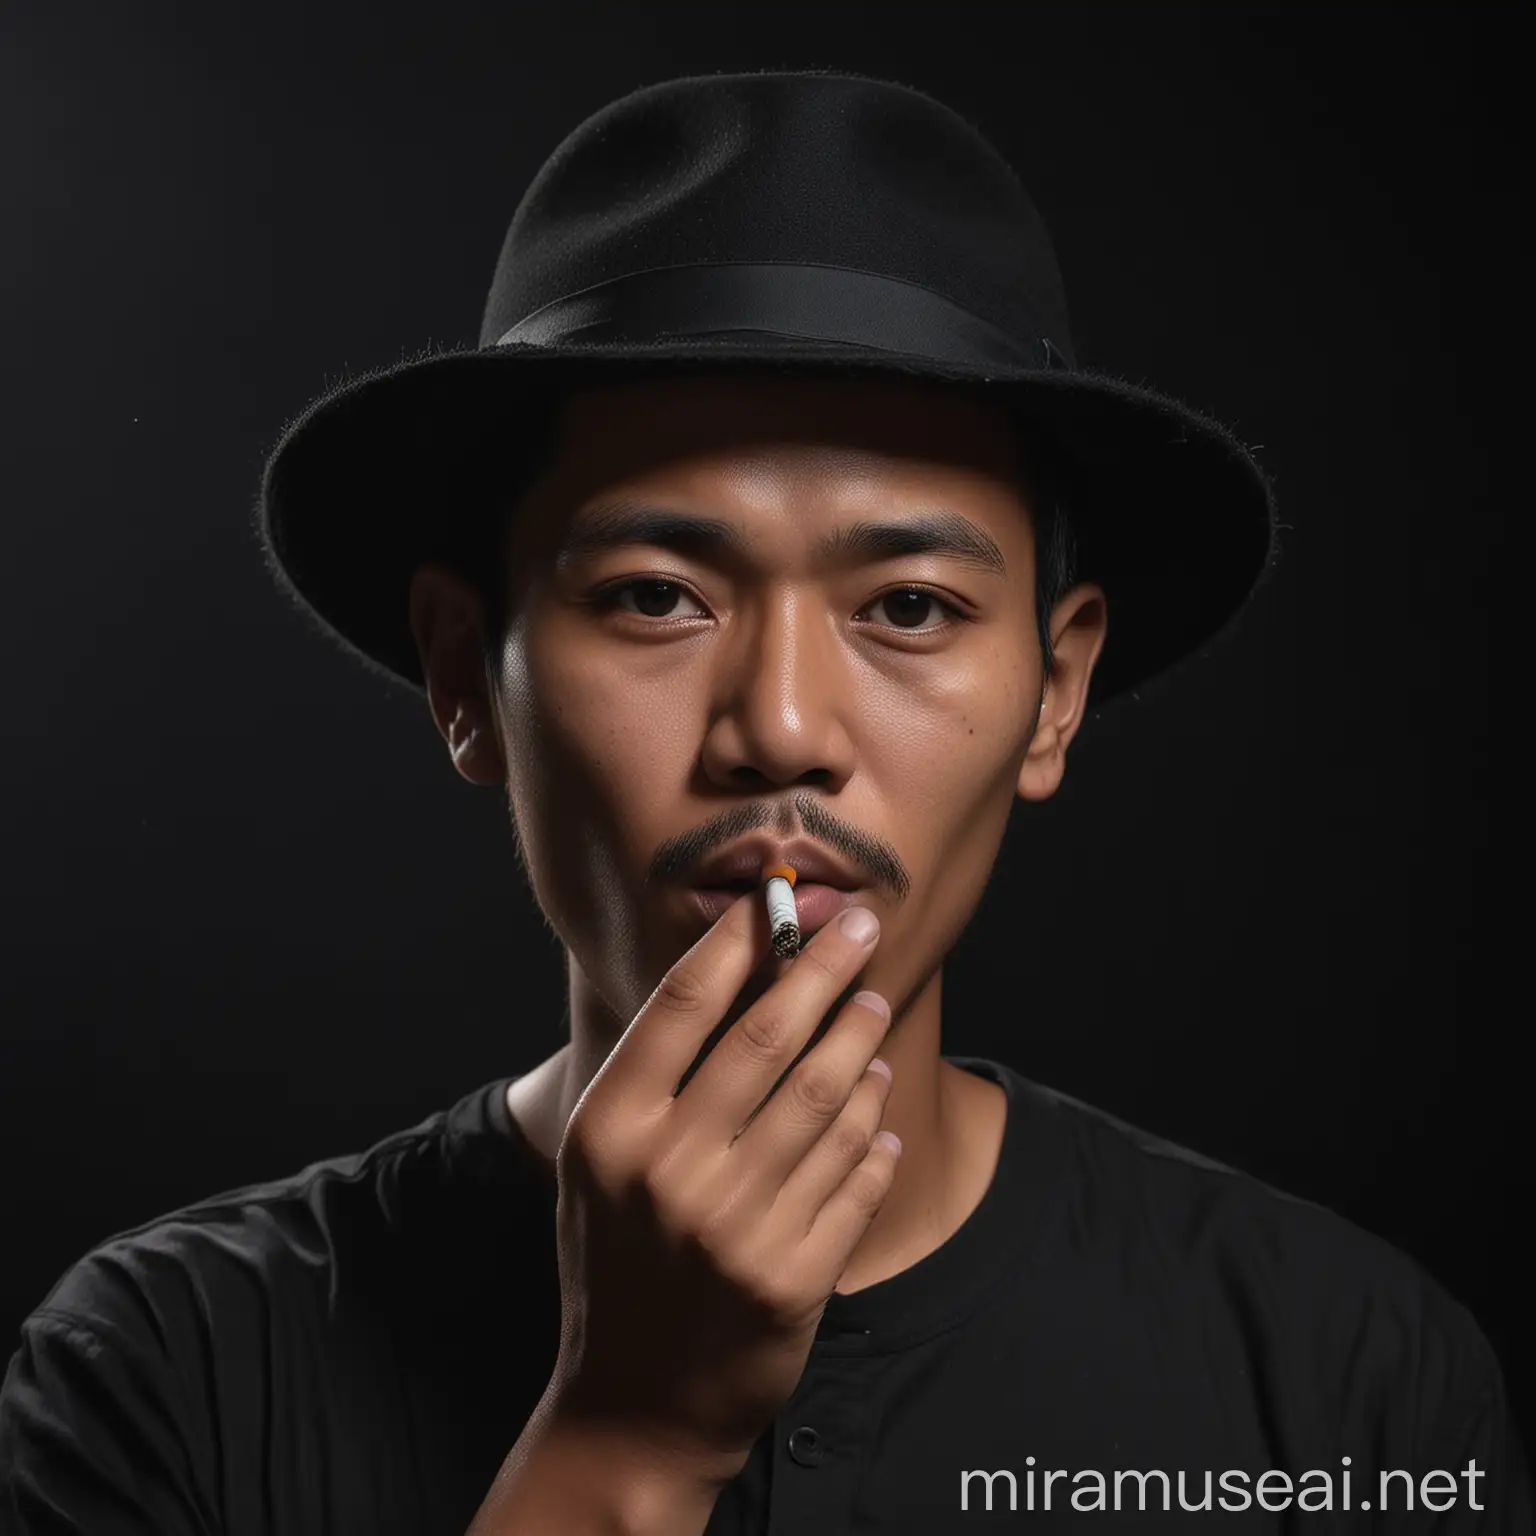 Portrait photo low key, an Indonesian man aged 27 with a round face wearing a black shirt and black short hair, wearing a hat, holding a cigarette in his mouth, black background, ambient light photography low key photography, real original photo, uhd 32k